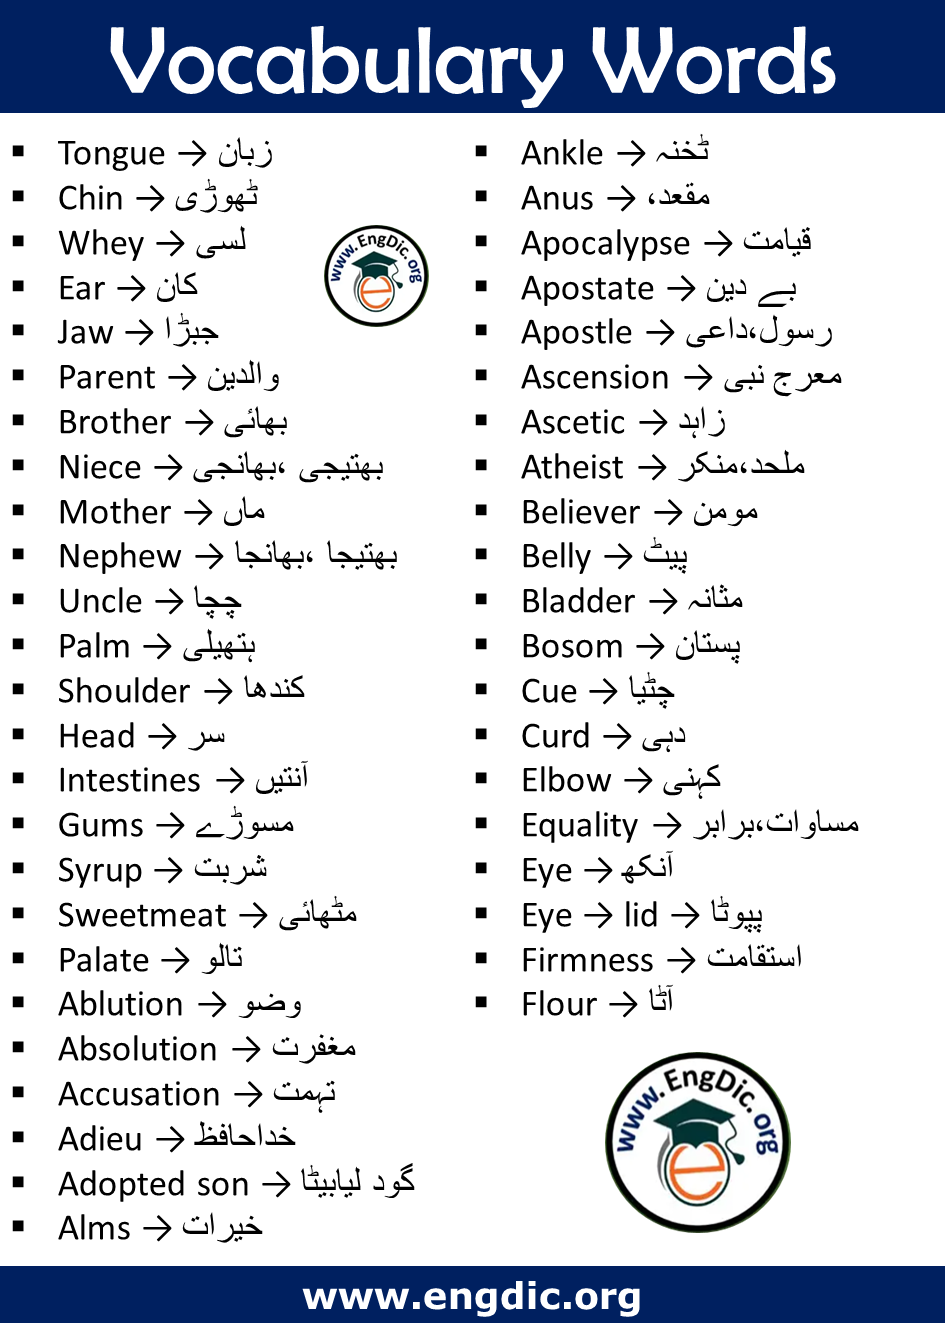 Vocabulary Words with meaning in Urdu